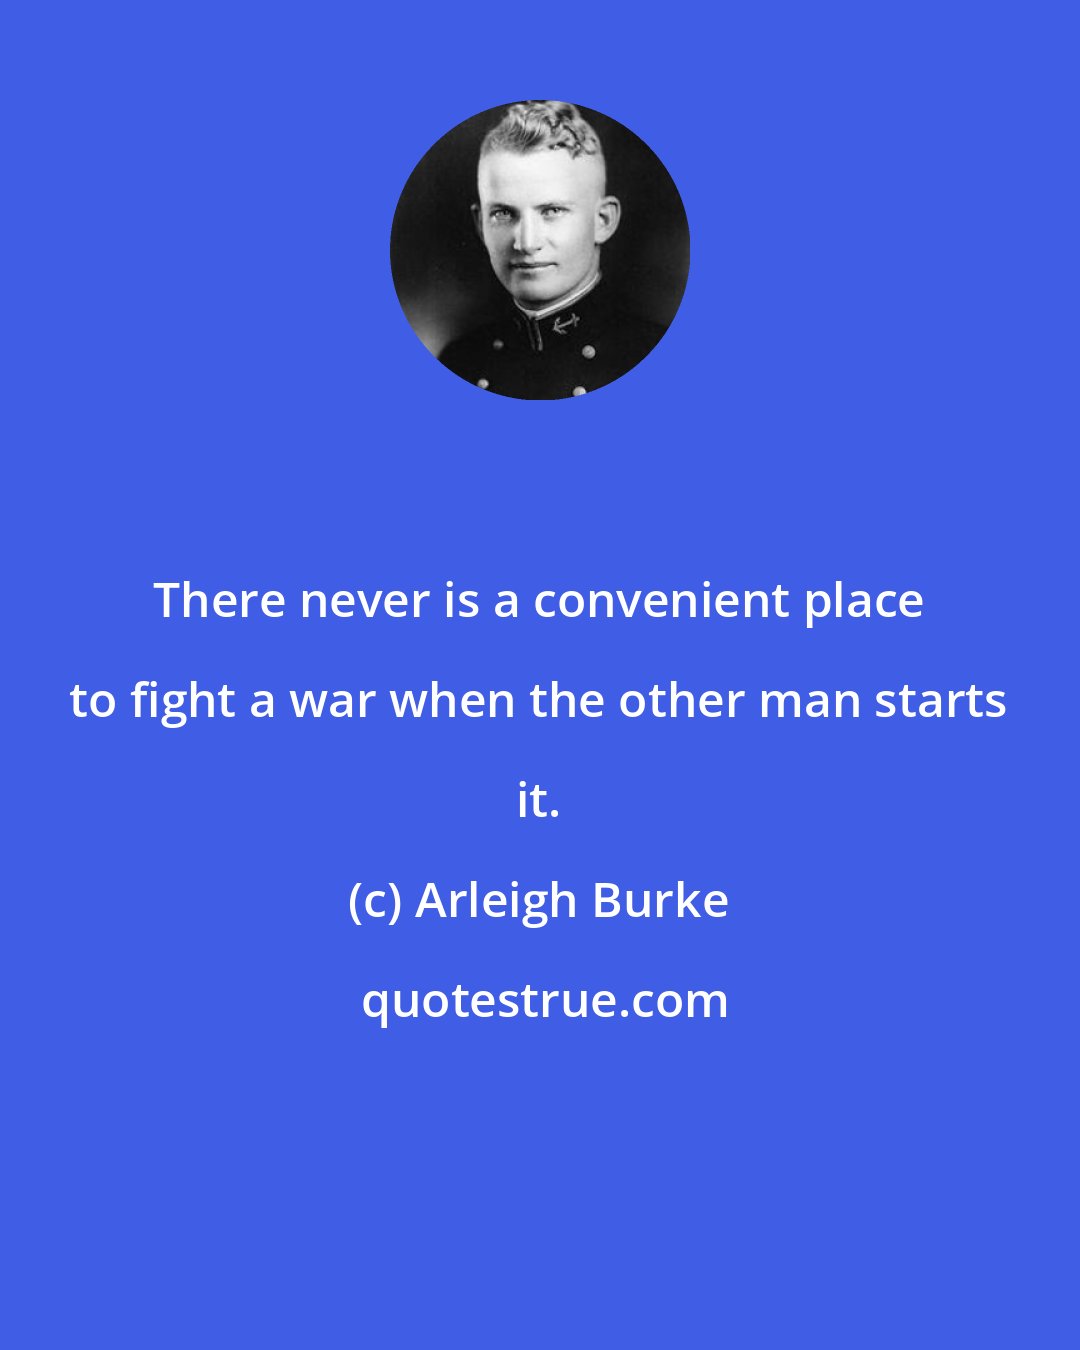 Arleigh Burke: There never is a convenient place to fight a war when the other man starts it.